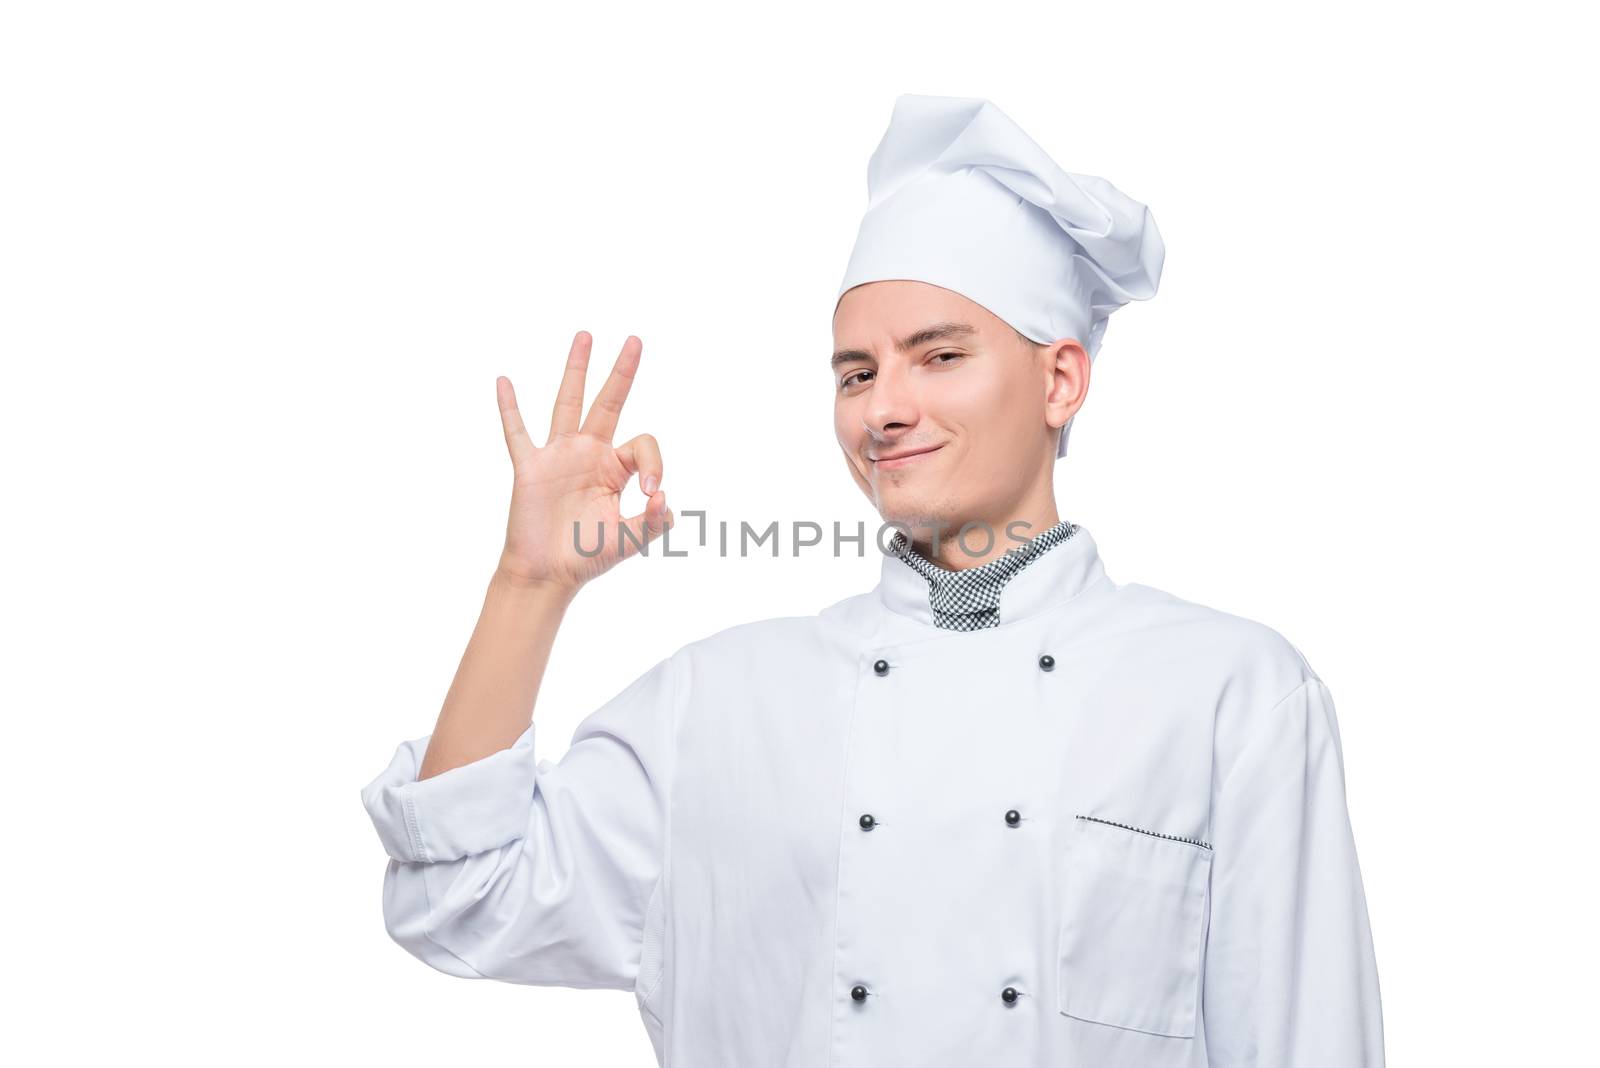 successful chef with hand gesture, portrait on white background isolated